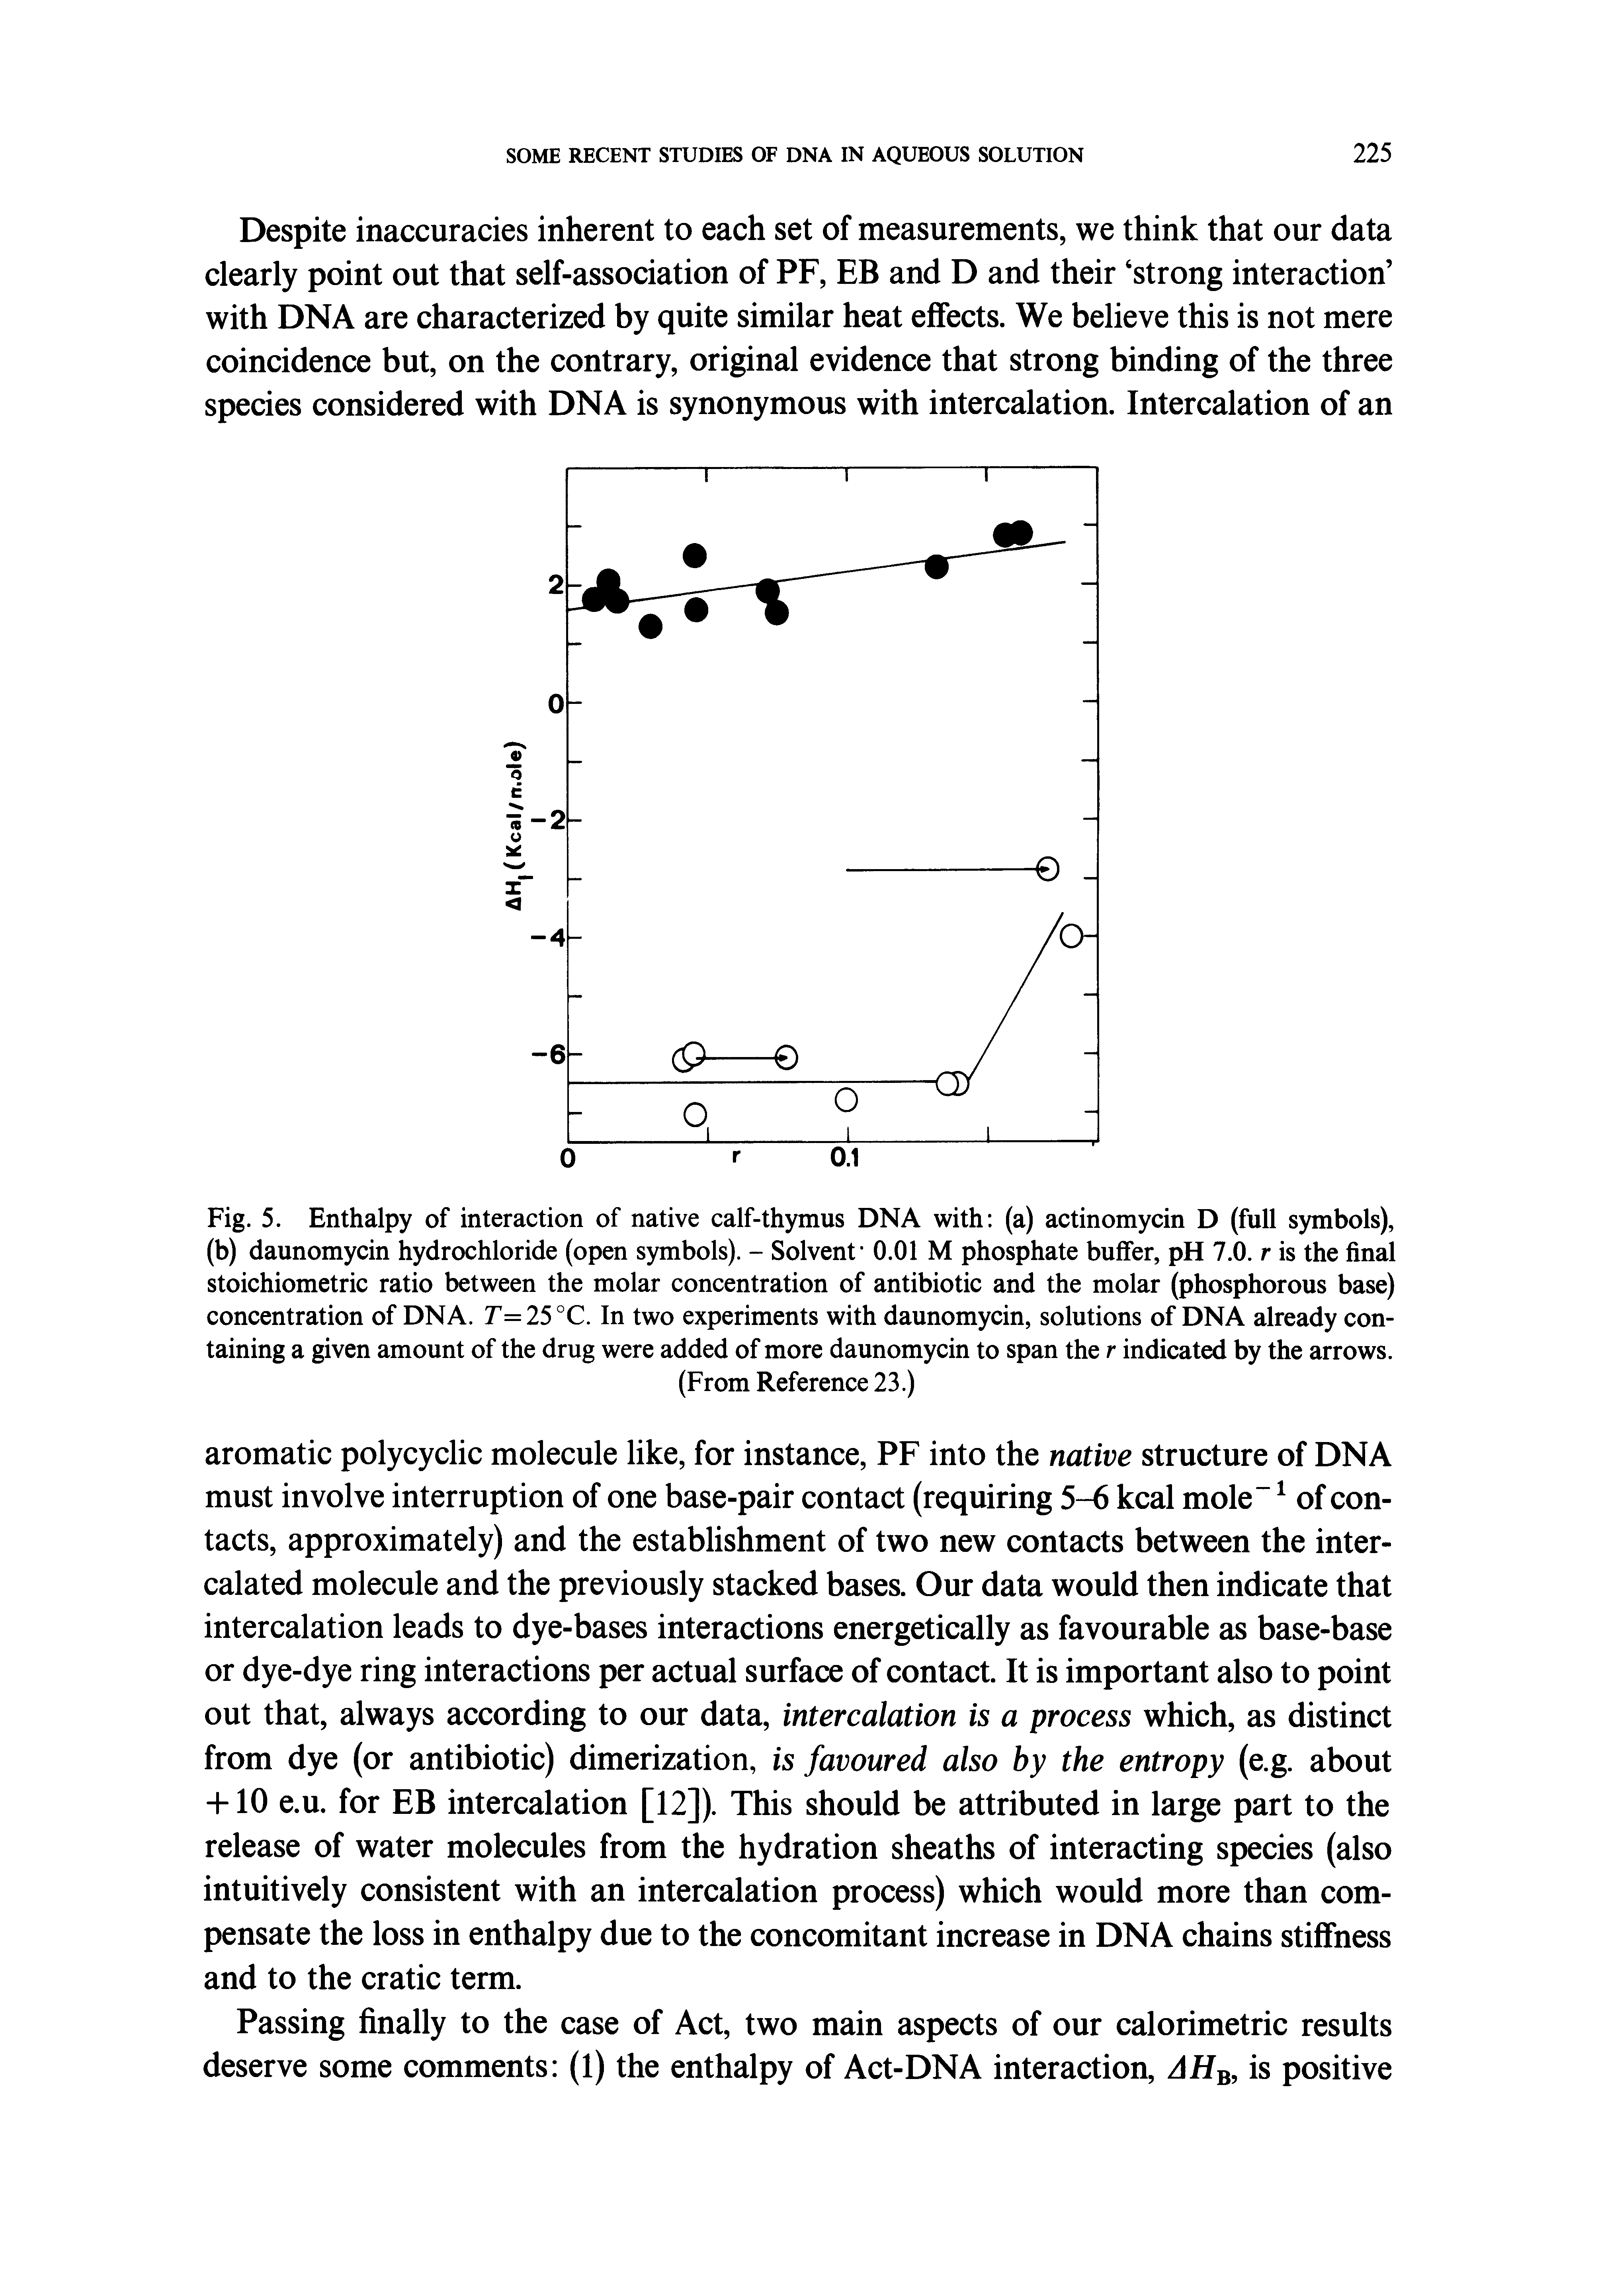 Fig. 5. Enthalpy of interaction of native calf-thymus DNA with (a) actinomycin D (full symbols), (b) daunomycin hydrochloride (open symbols). - Solvent 0.01 M phosphate buffer, pH 7.0. r is the final stoichiometric ratio between the molar concentration of antibiotic and the molar (phosphorous base) concentration of DNA. F= 25 °C. In two experiments with daunomycin, solutions of DNA already containing a given amount of the drug were added of more daunomycin to span the r indicated by the arrows.